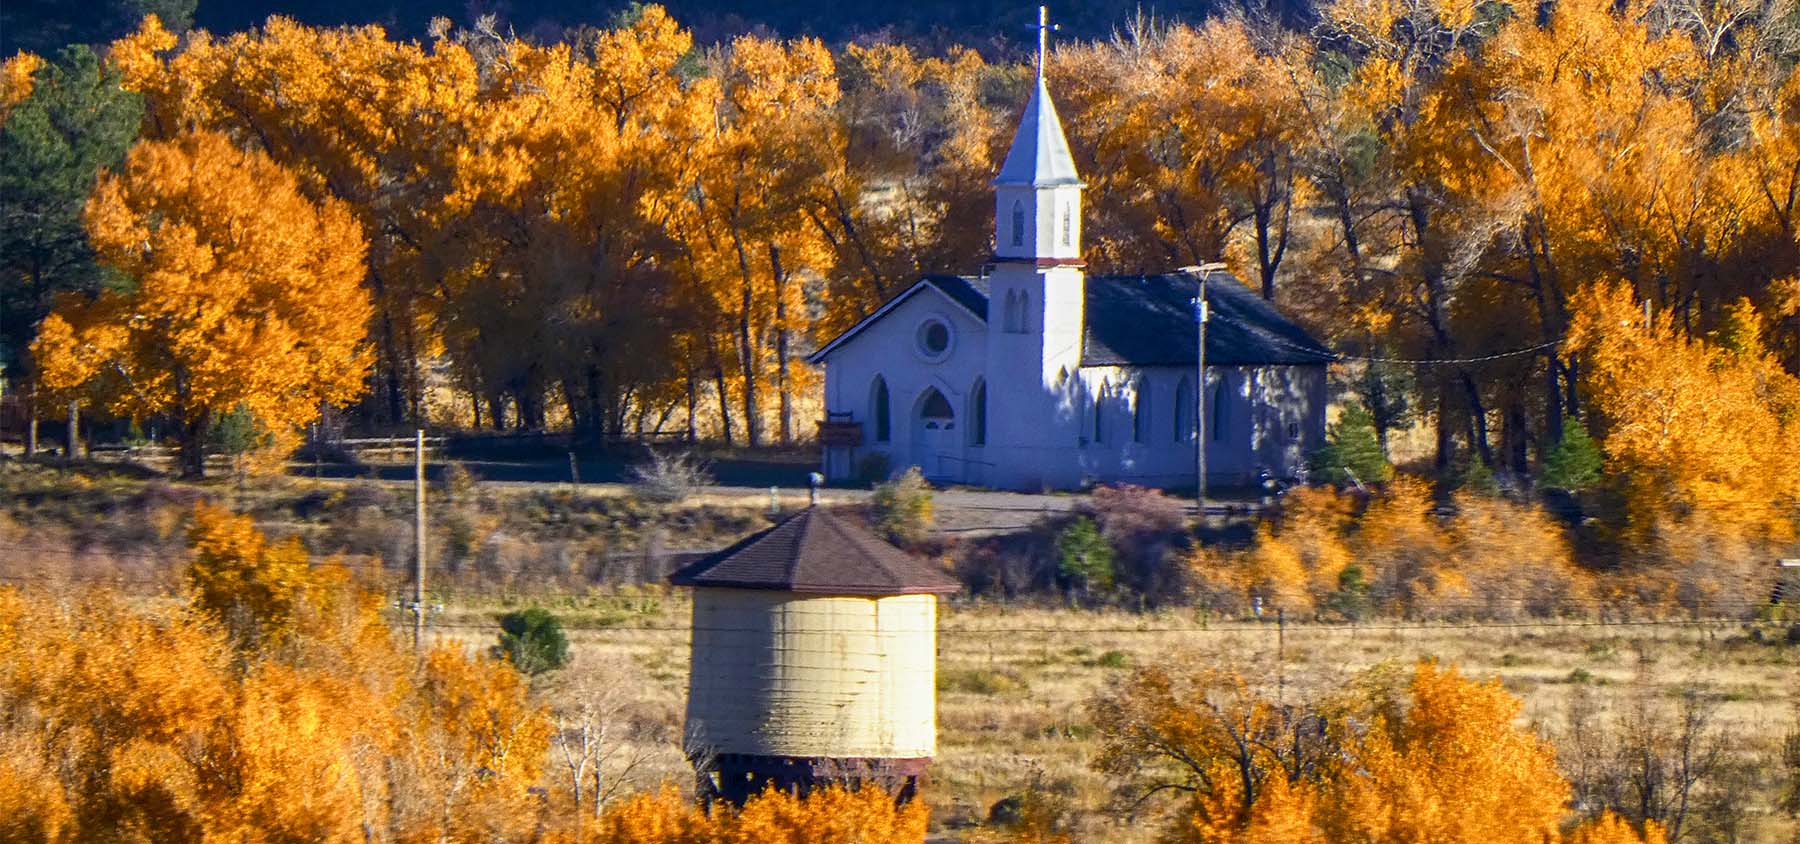 South Fork Water Tower and Church